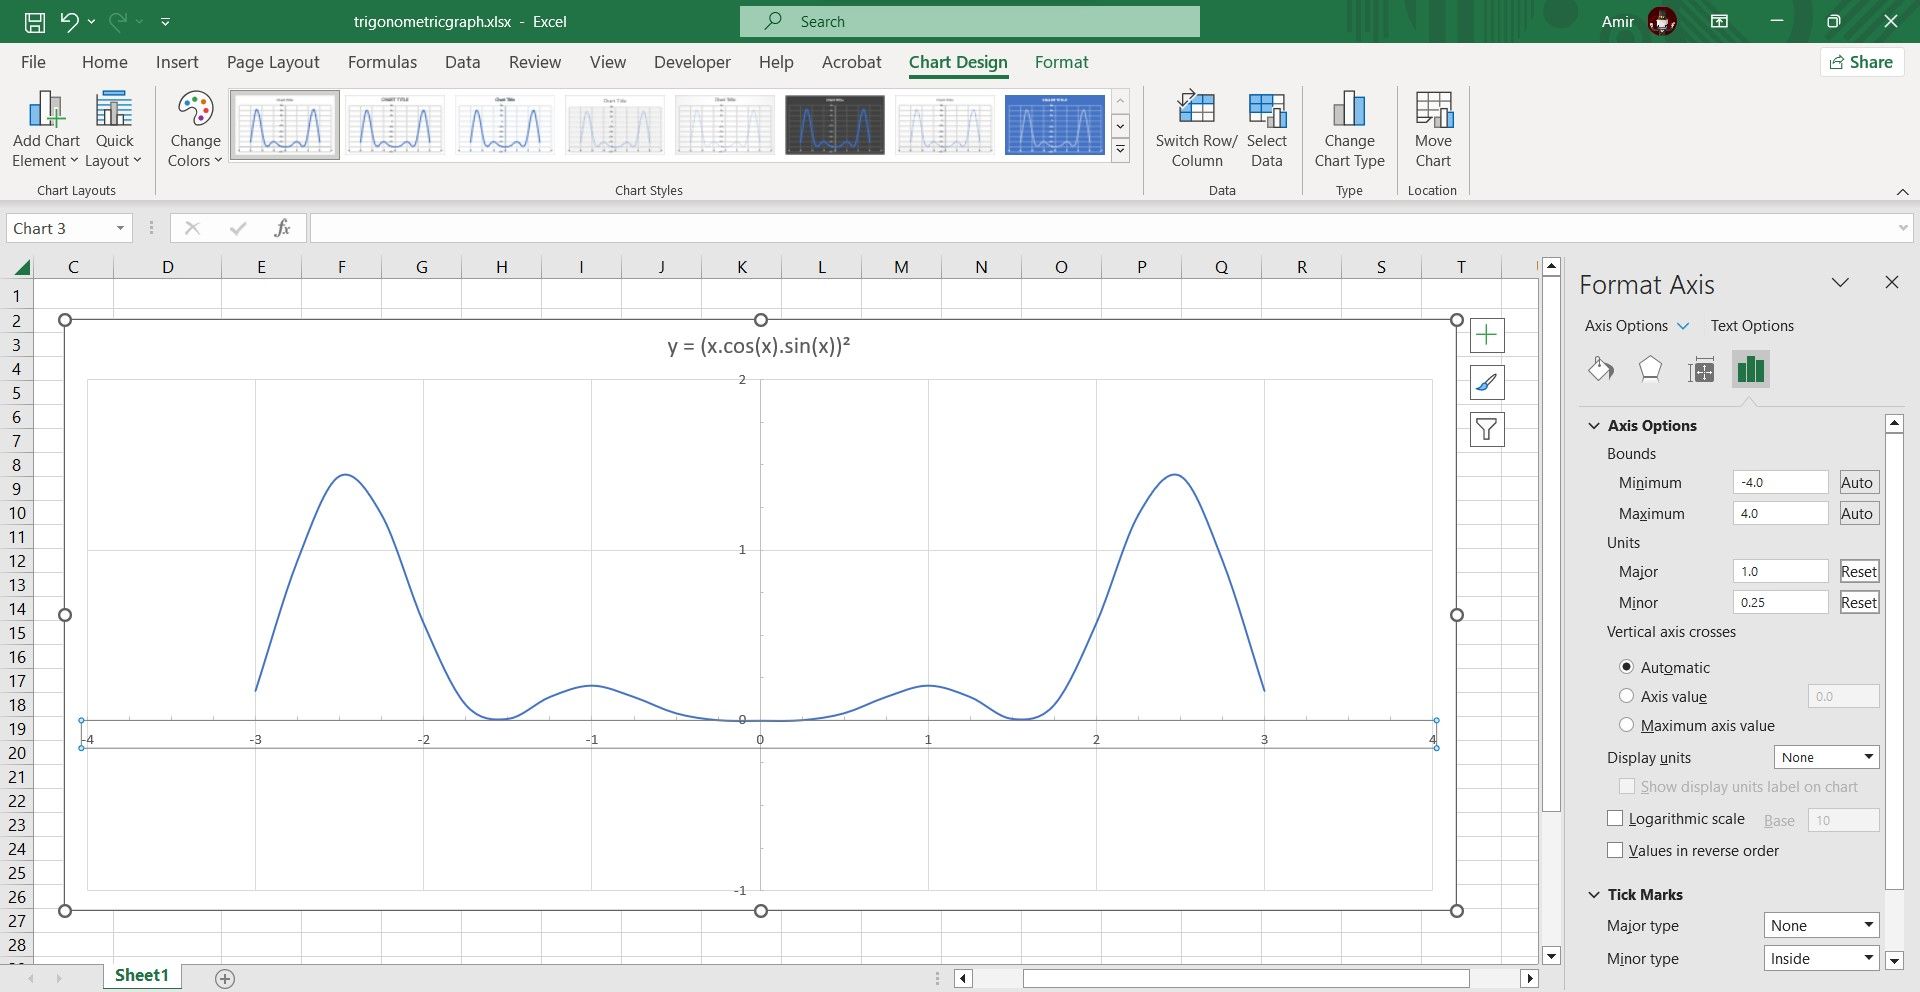 Formatting axis in an Excel chart